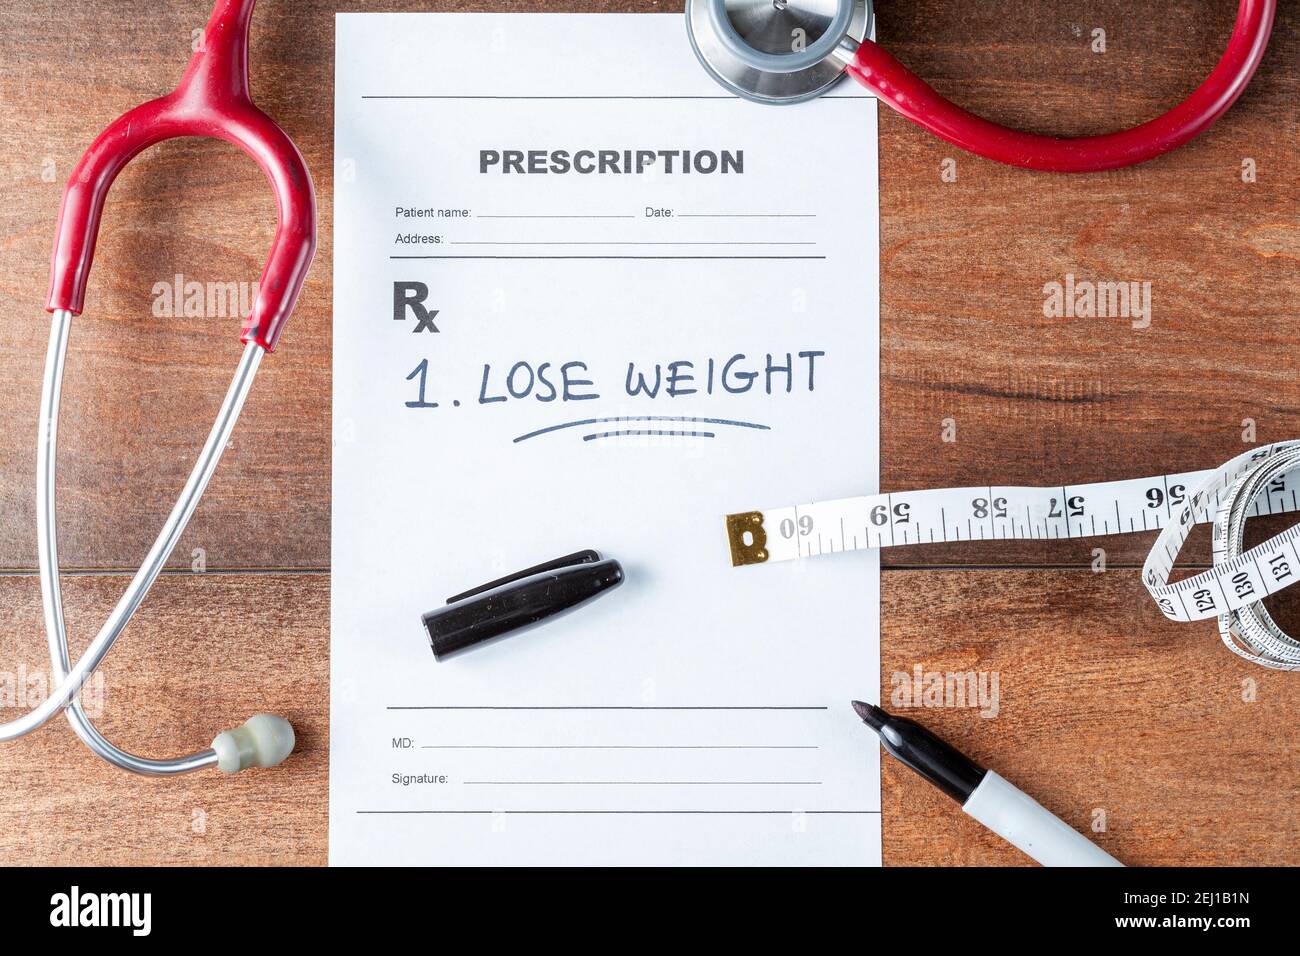 https://c8.alamy.com/comp/2EJ1B1N/flat-lay-image-of-a-physician-desk-with-a-stethoscope-a-pen-a-tape-measure-and-a-prescription-that-says-lose-weight-getting-in-shape-doctor-recom-2EJ1B1N.jpg